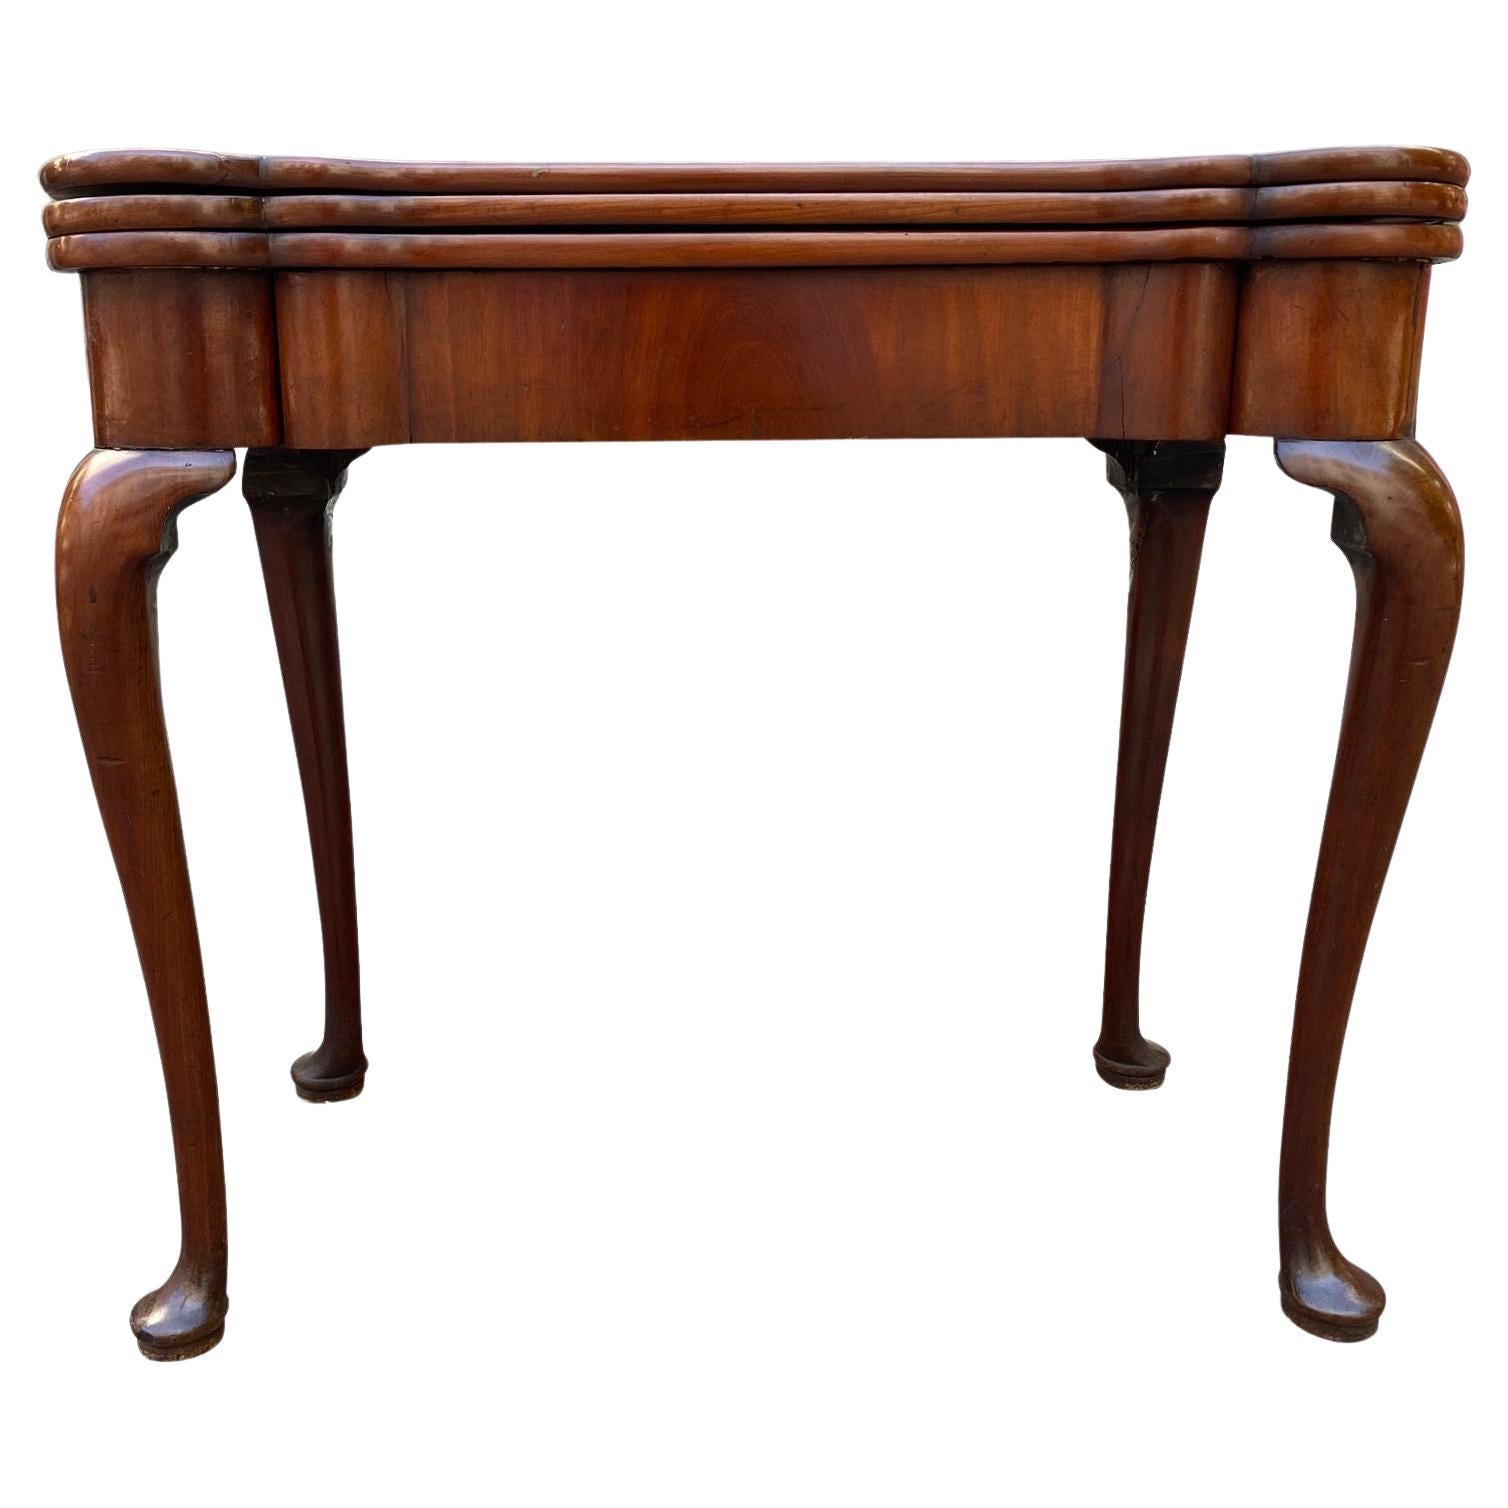 Very Fine Mid 18th Century George II Period Mahogany Triple Top Card Table